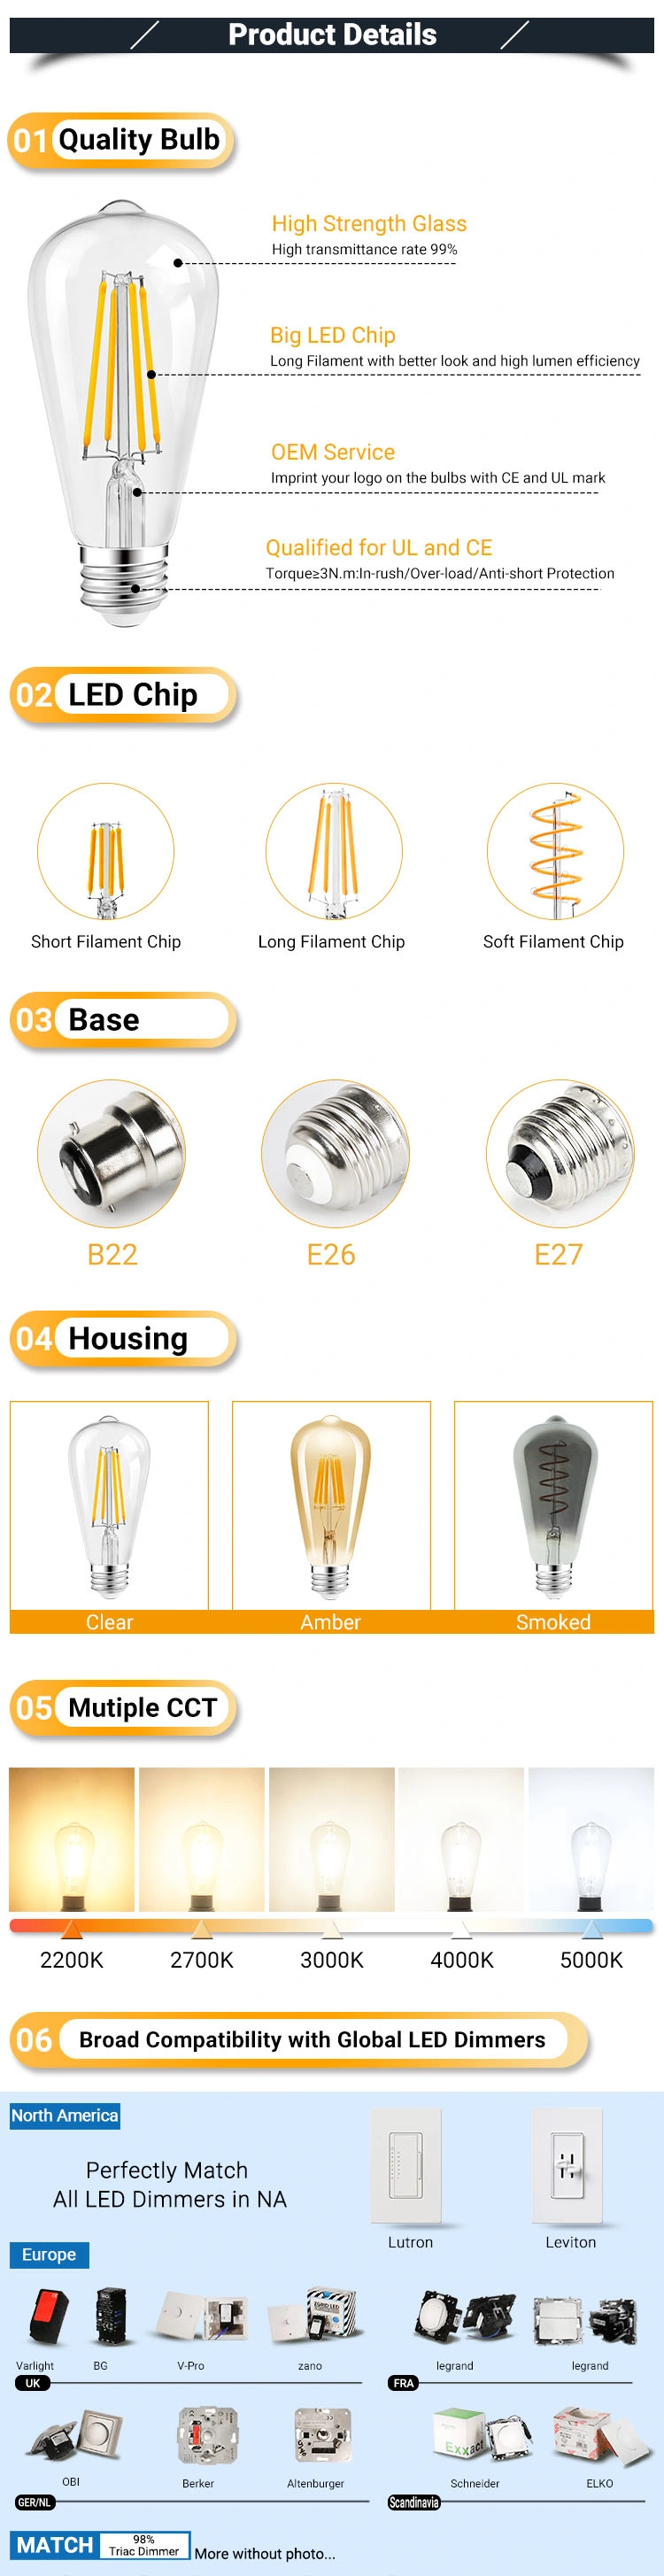 LED Filament Bulb St64 4W 6W 8W Dimmable Decorative Factory Price LED Manufacturer Light Bulb